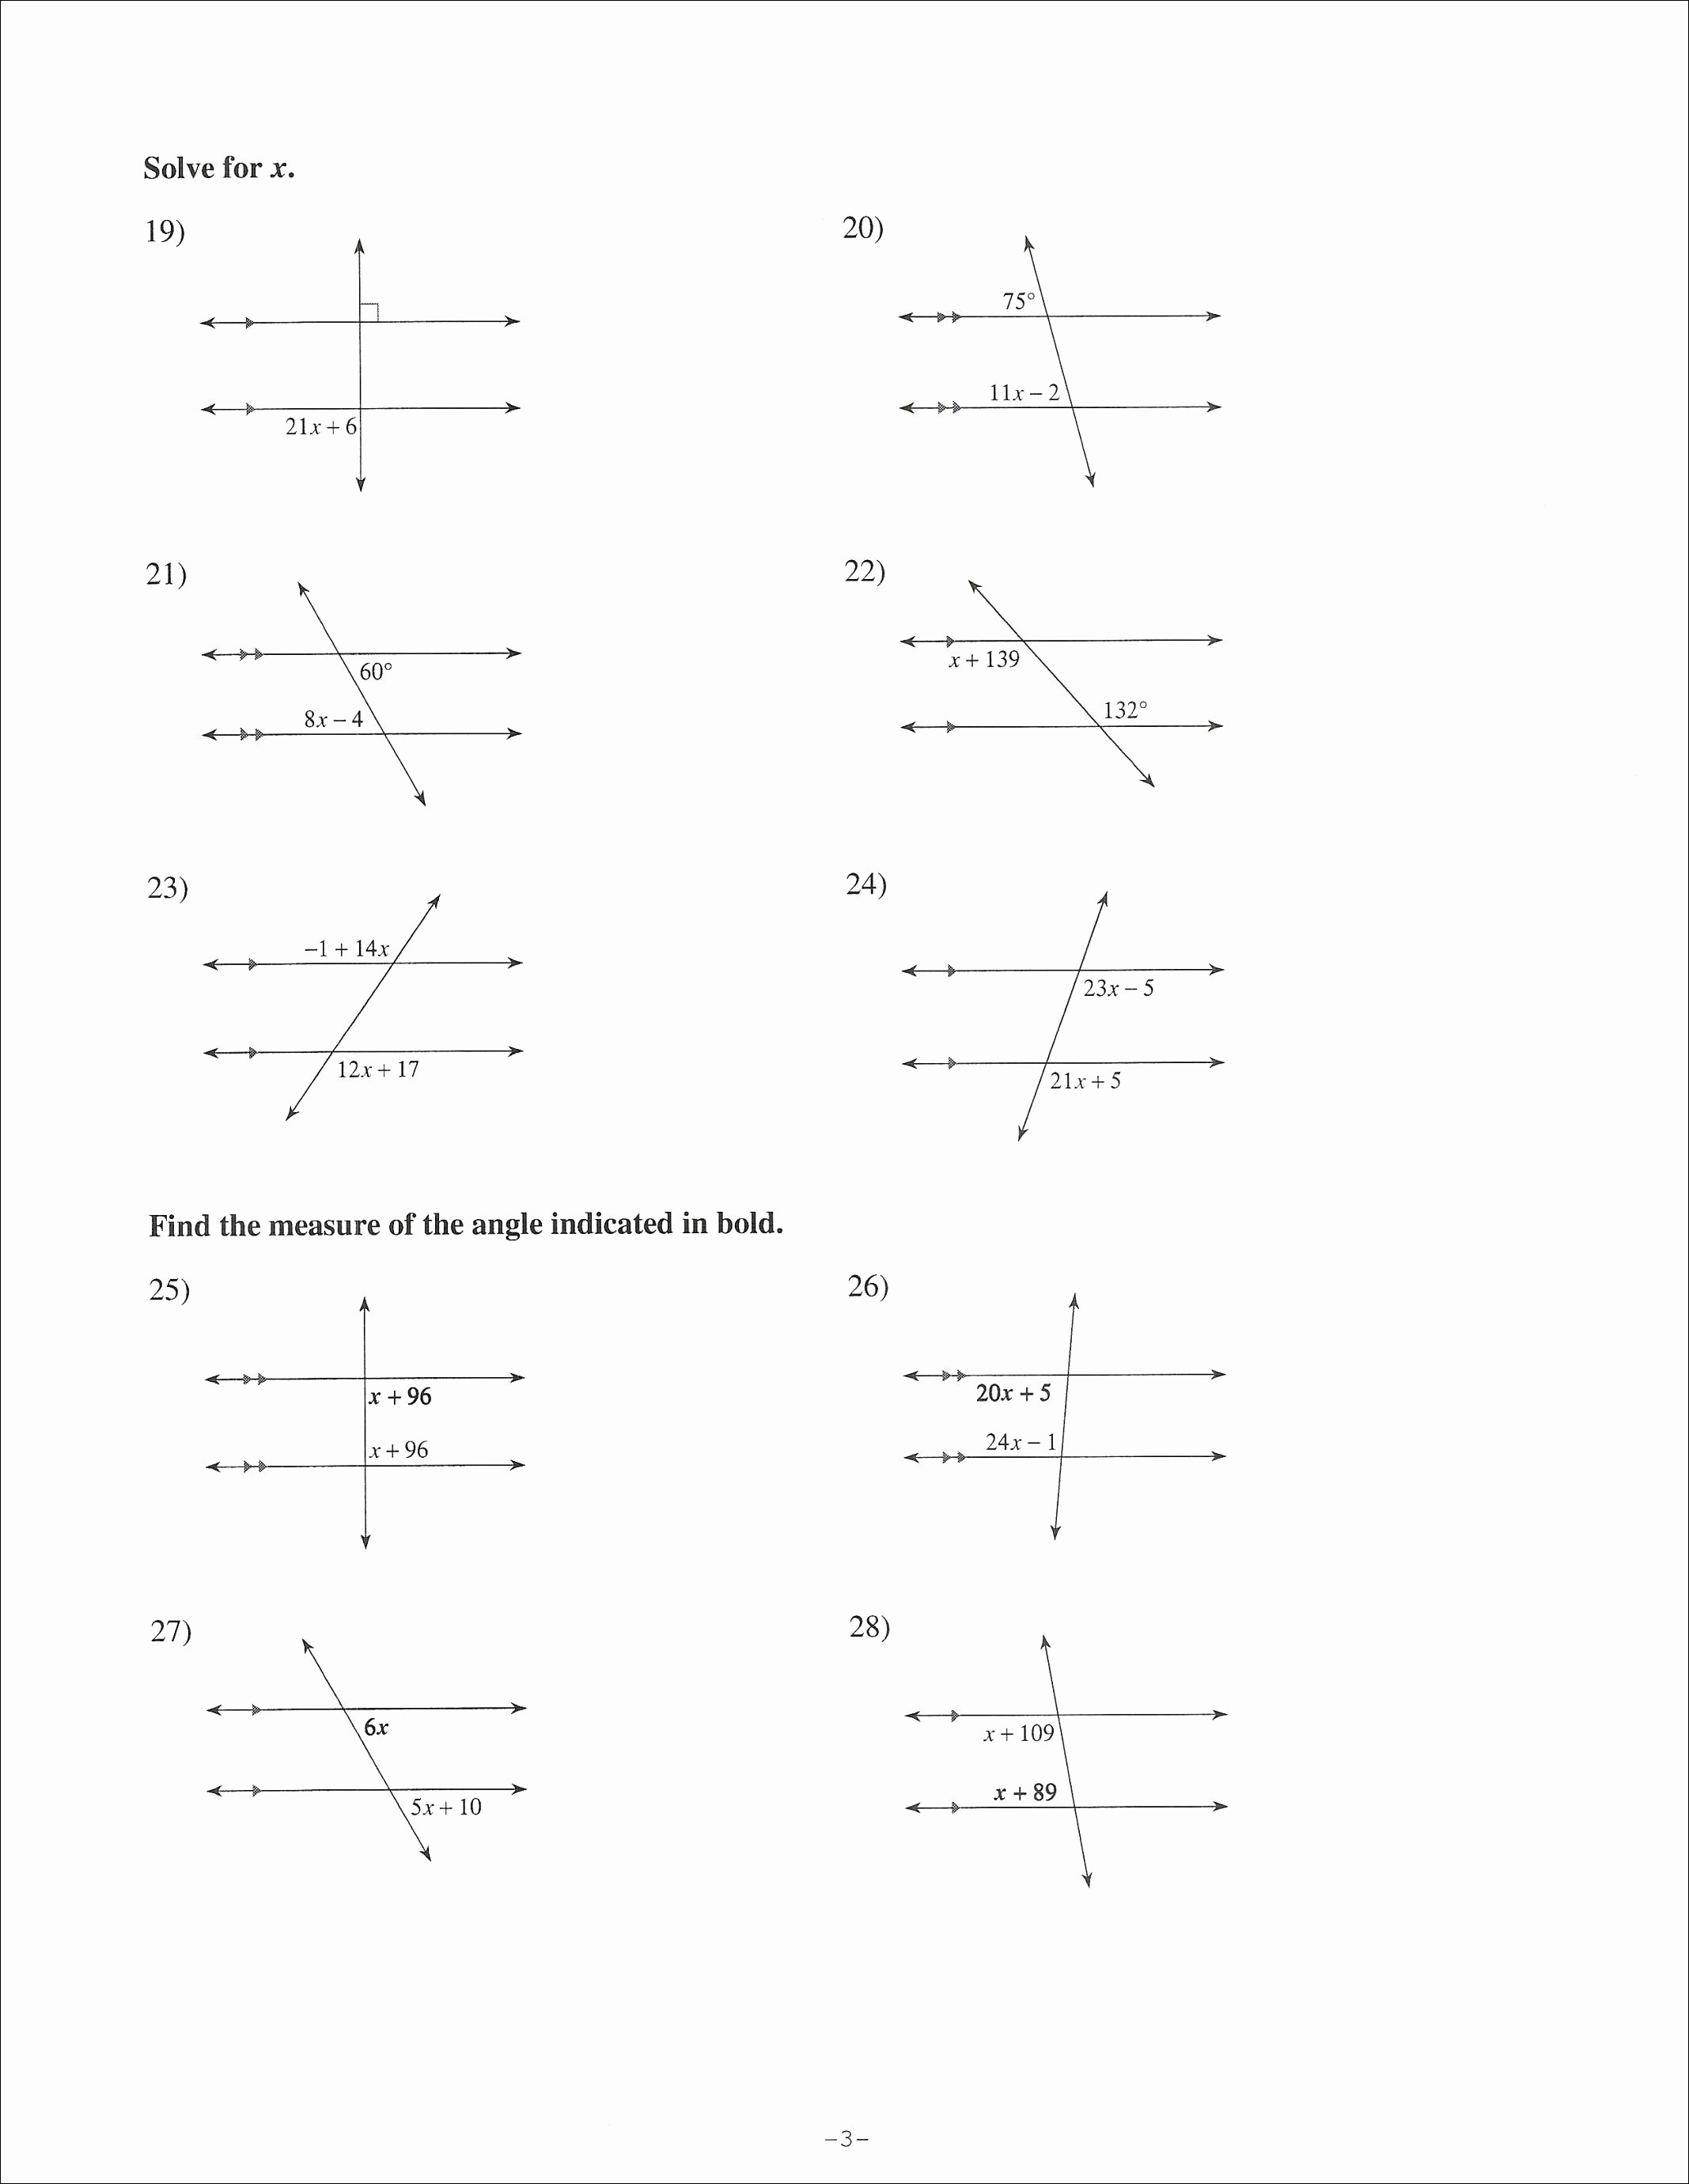 parallel lines and transversals worksheet